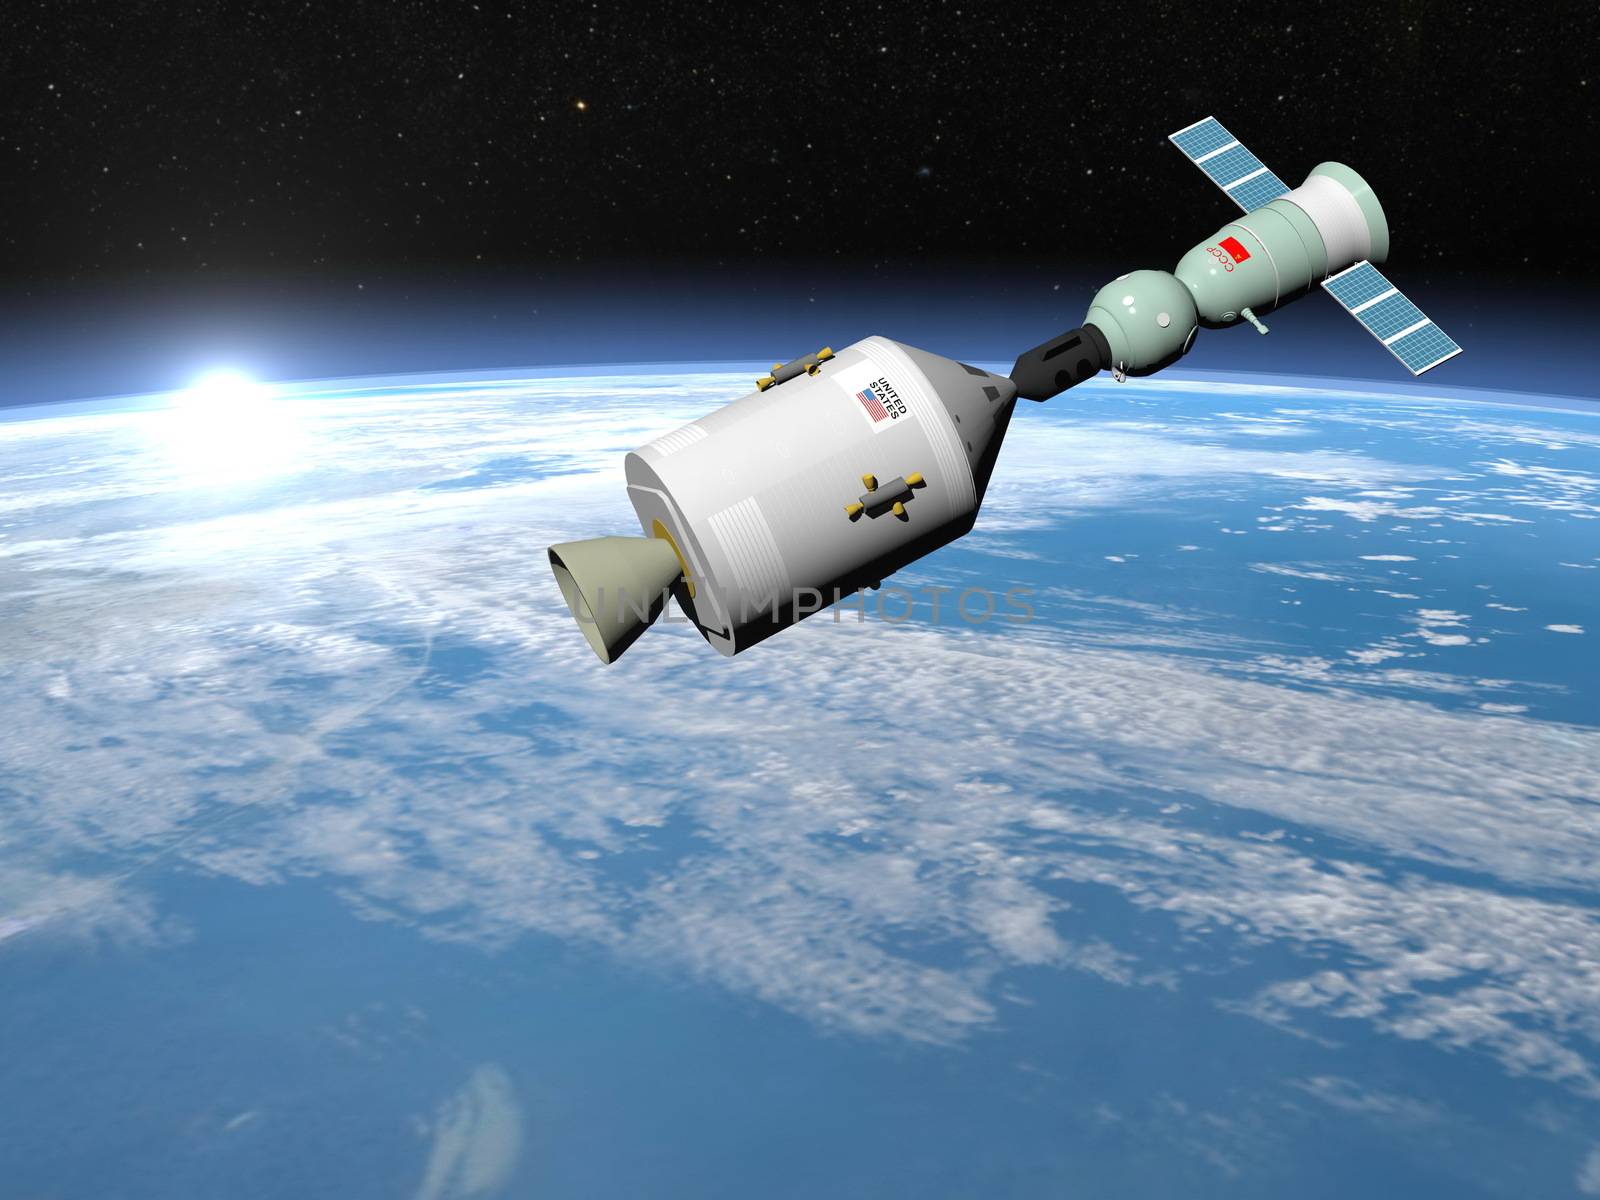 Apollo-Soyuz test project with experimental joint flight of the Soviet spaceship Soyuz-19 and the American spaceship Apollo, elements of this image furnished by NASA - 3D render